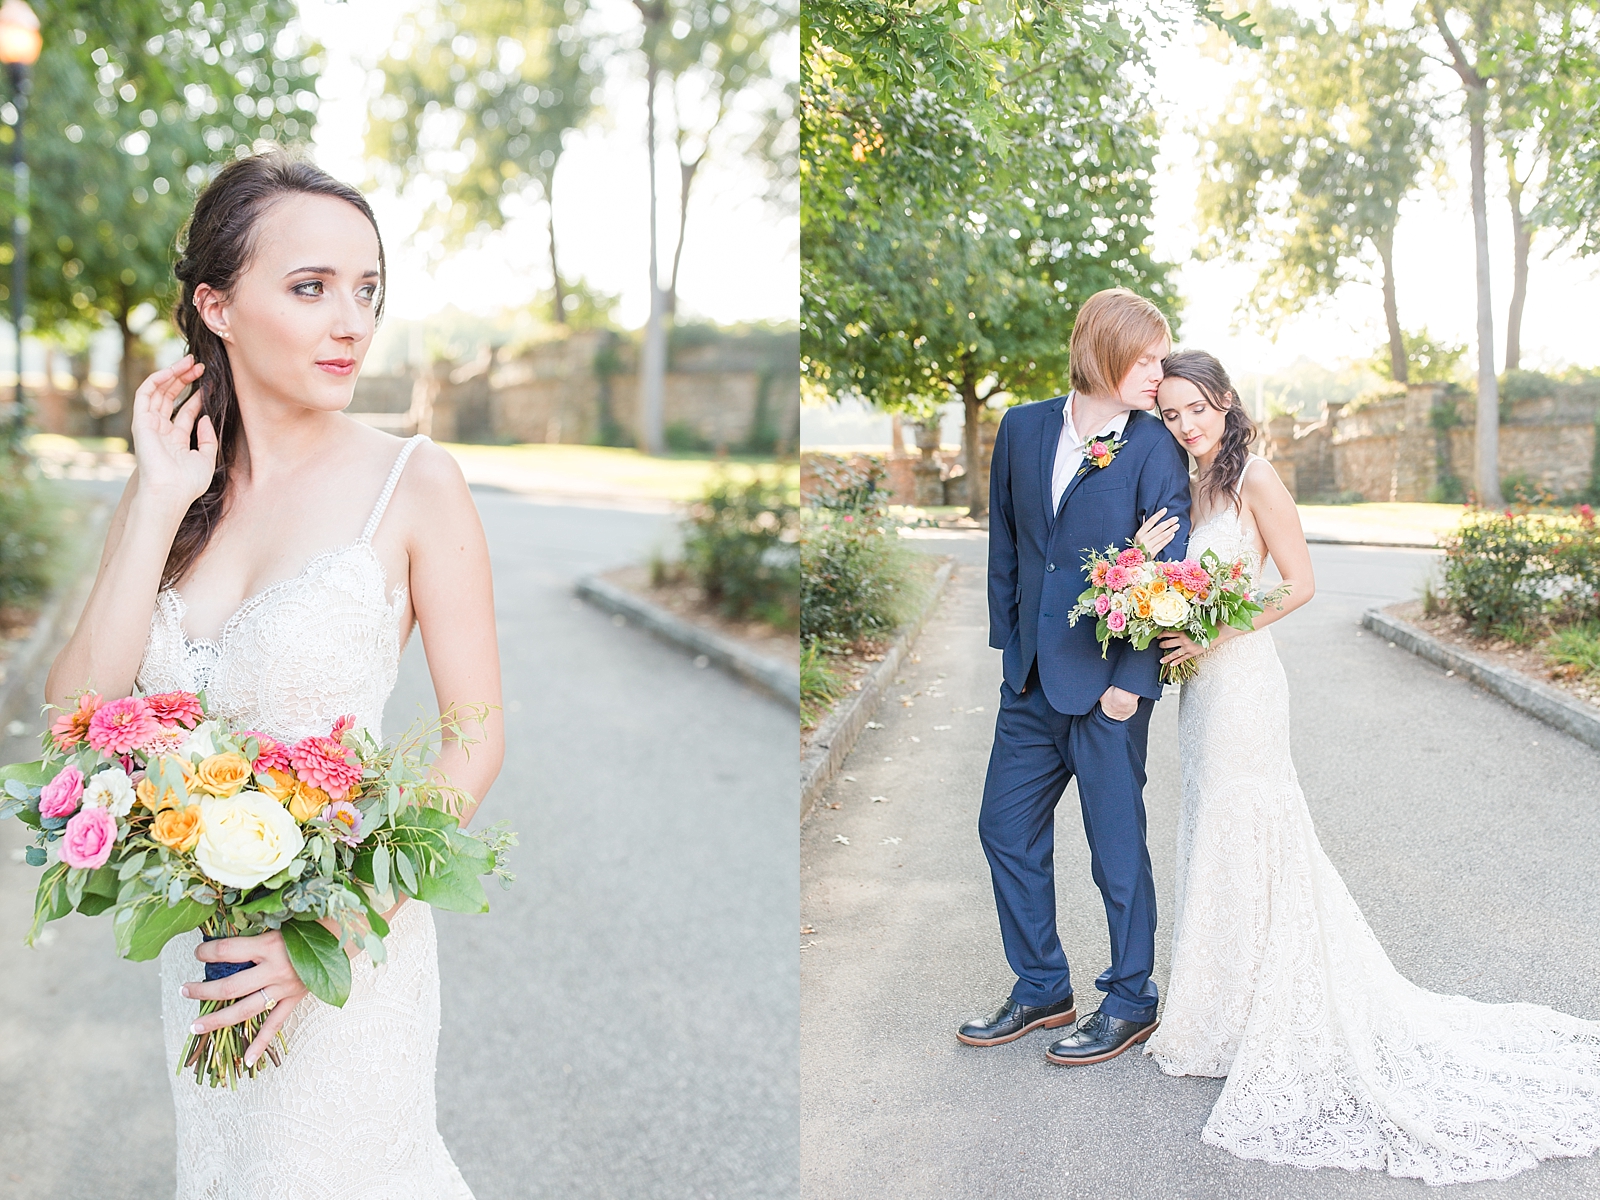 Atlanta Georgia Elopement Bride holding bouquet with pink and yellow roses and groom kissing bride on forehead Photos